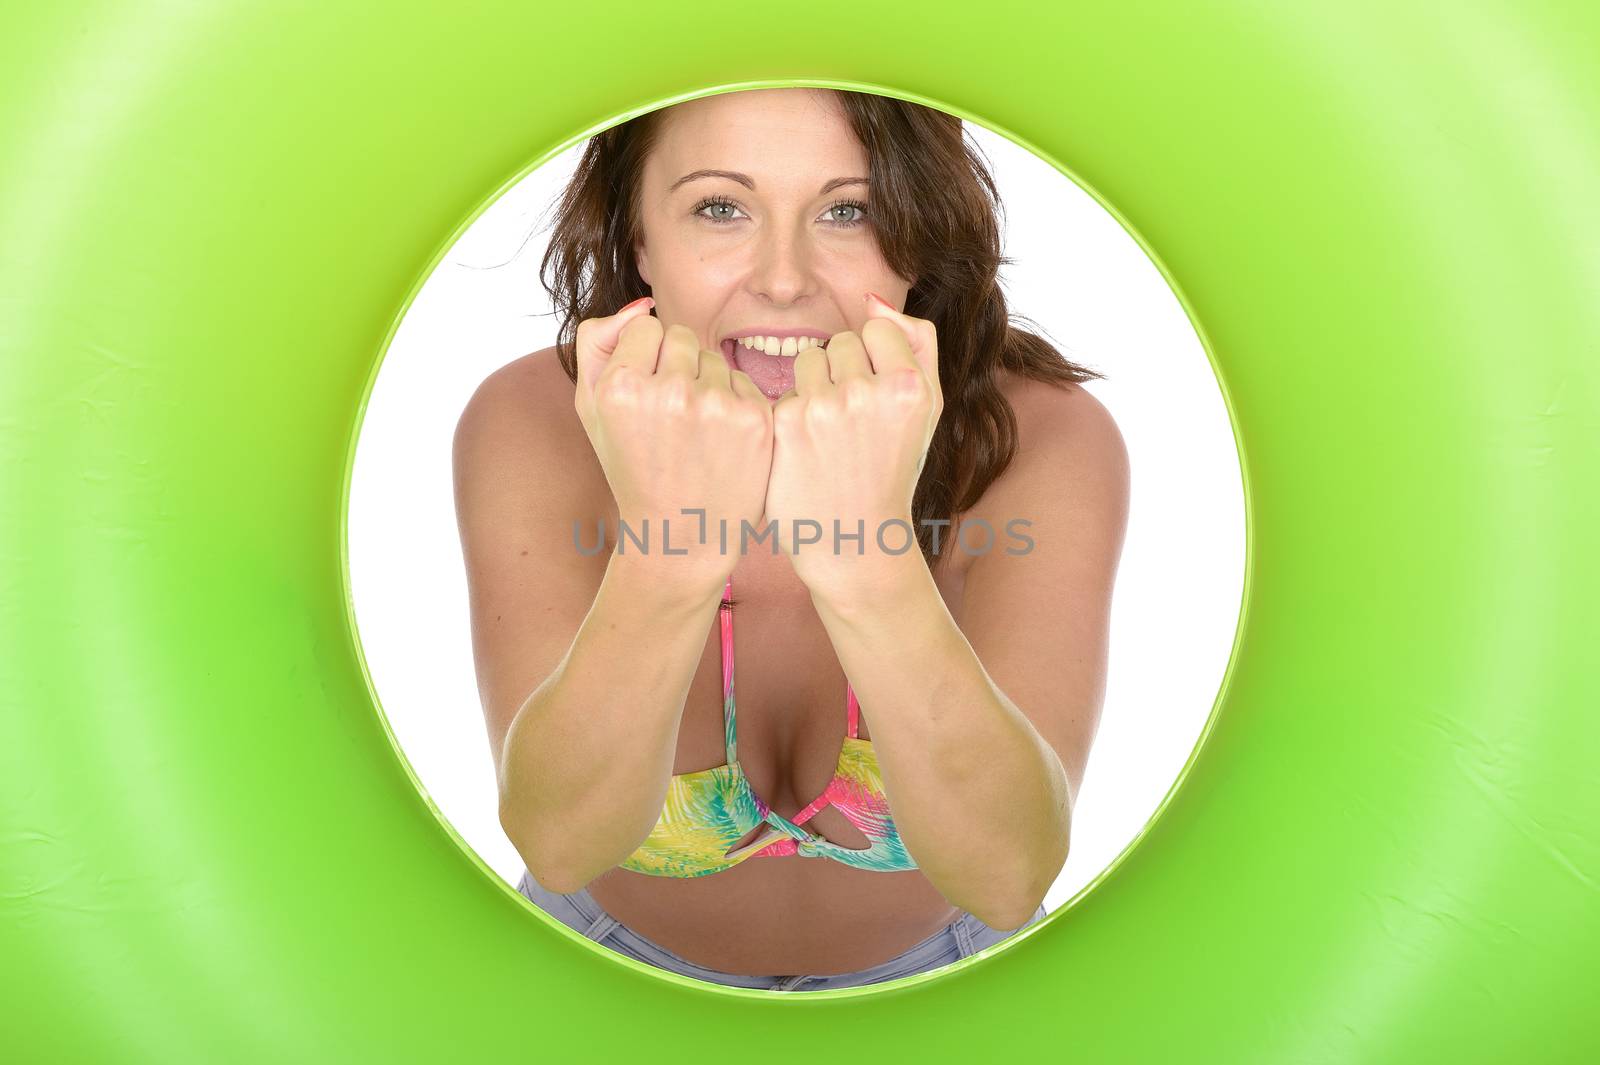 Attractive Young Woman Looking Through a Green Rubber Ring by Whiteboxmedia